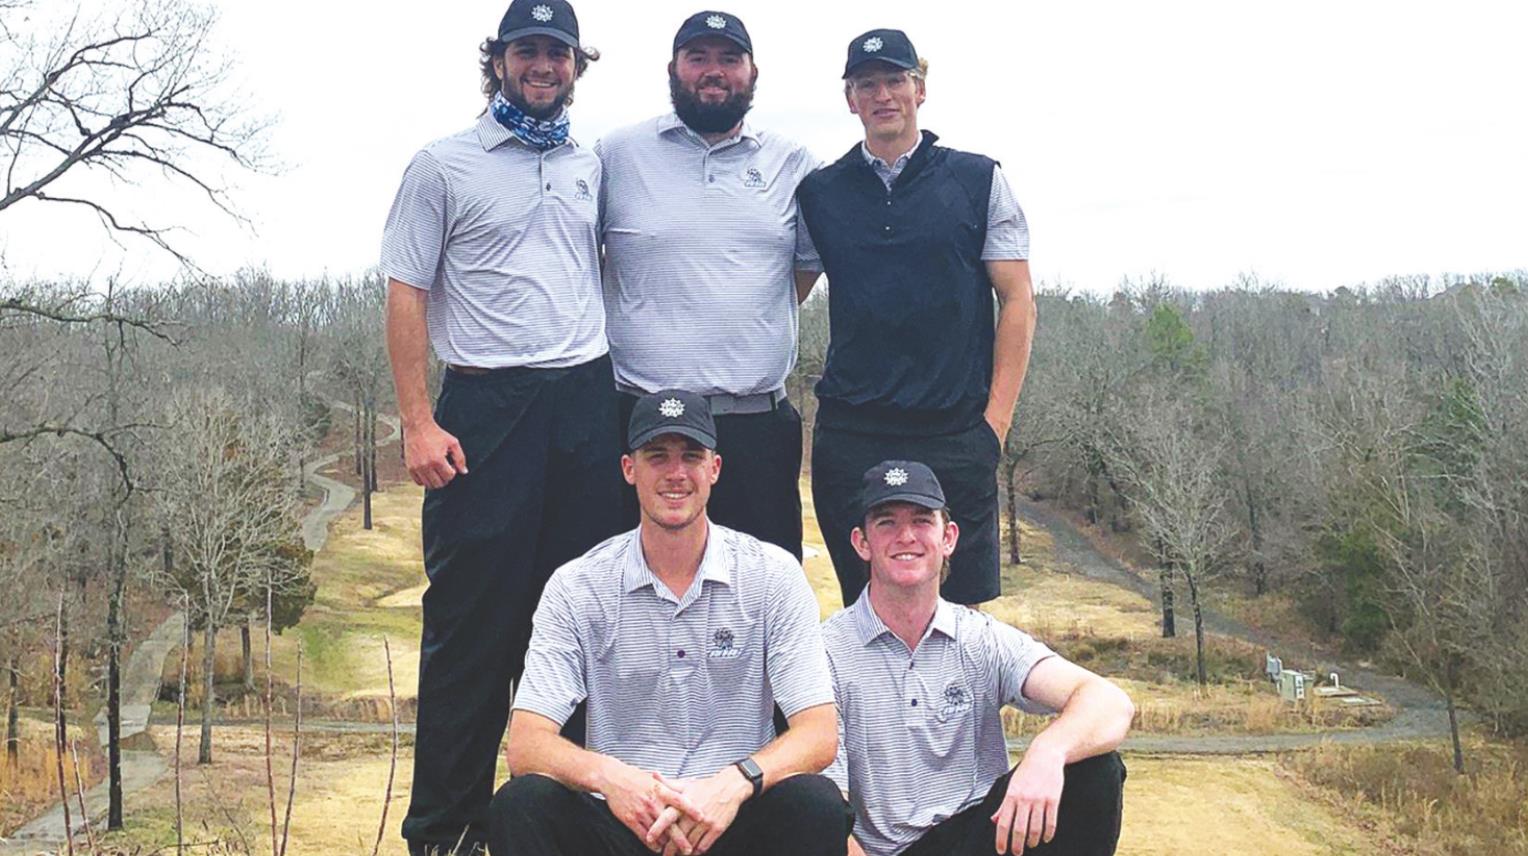 The SWOSU men’s golf team finished in the Top 5 at the Natural State Golf Classic in Cabot, Arkansas — a second straight Top-5 finish. Provided